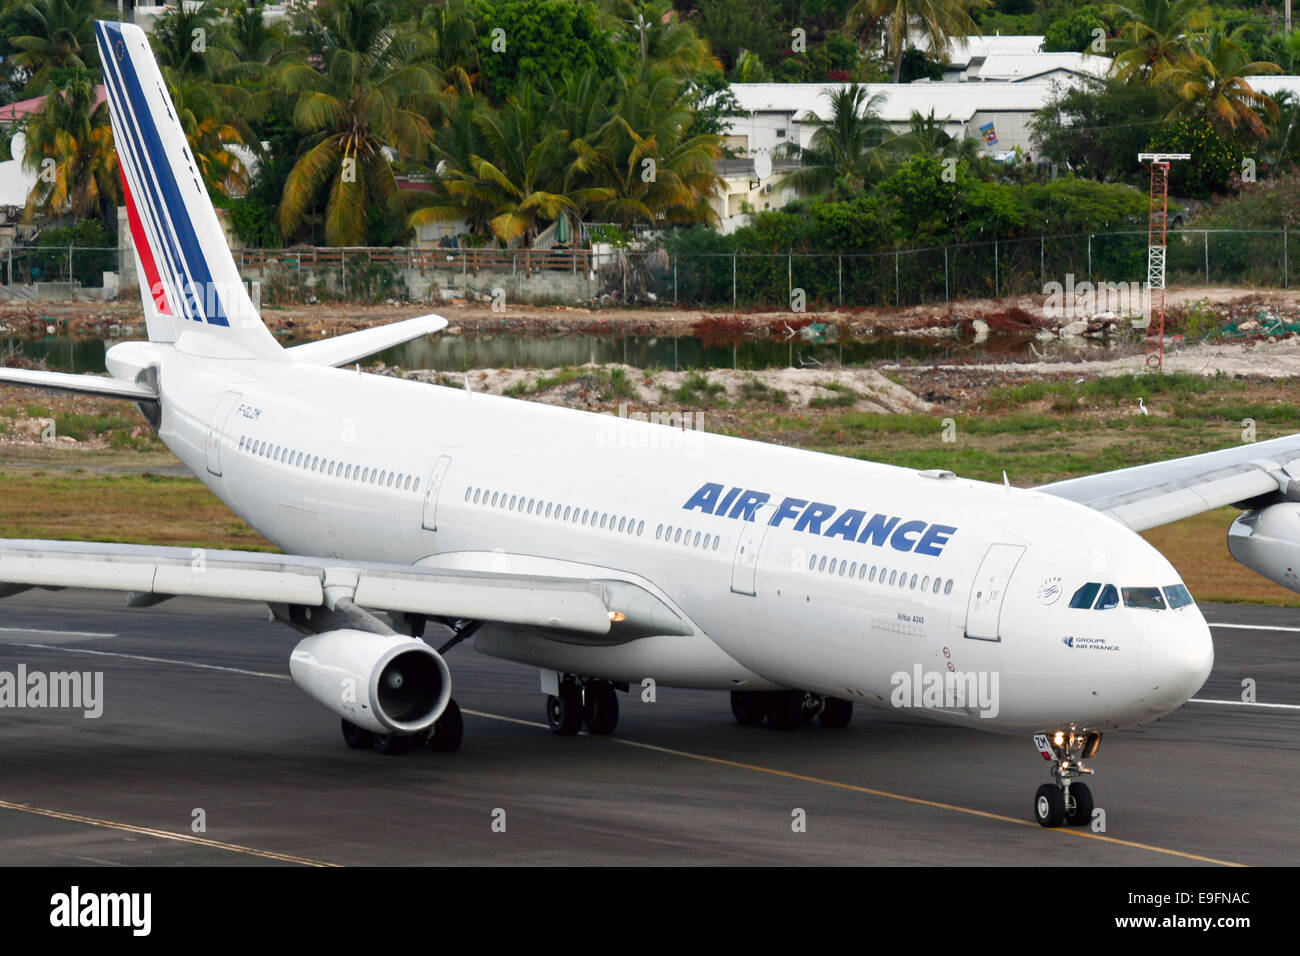 Air France Airbus A340-300 taxis into position for takeoff at St. Maarten airport. Stock Photo